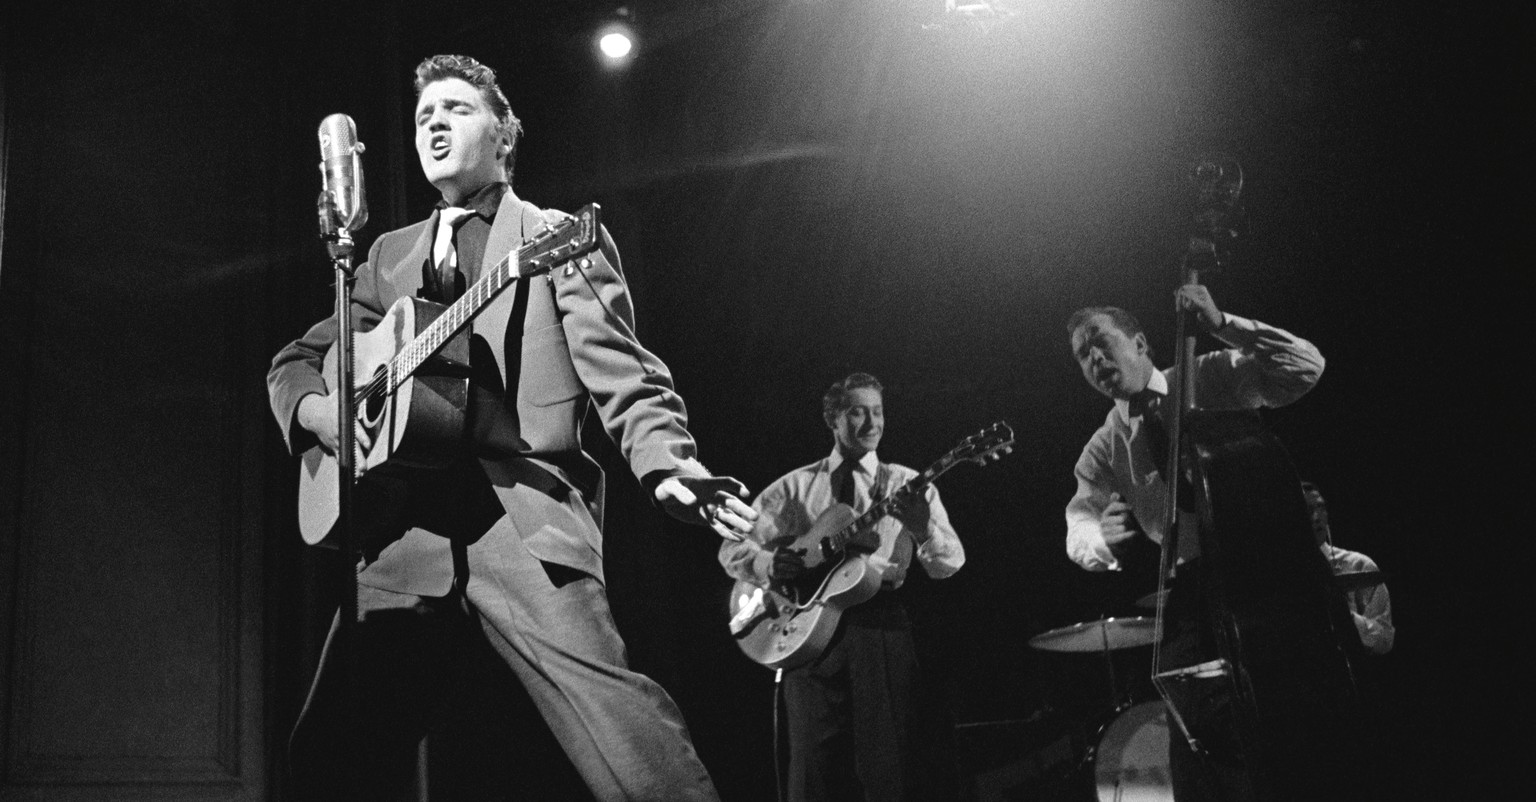 This March 17, 1956 photo provided by courtesy of Taschen shows, Elvis Presley, left, and band members, Scotty Moore, on guitar, Bill Black on bass, and DJ Fontana on drums, during a live performance  ...